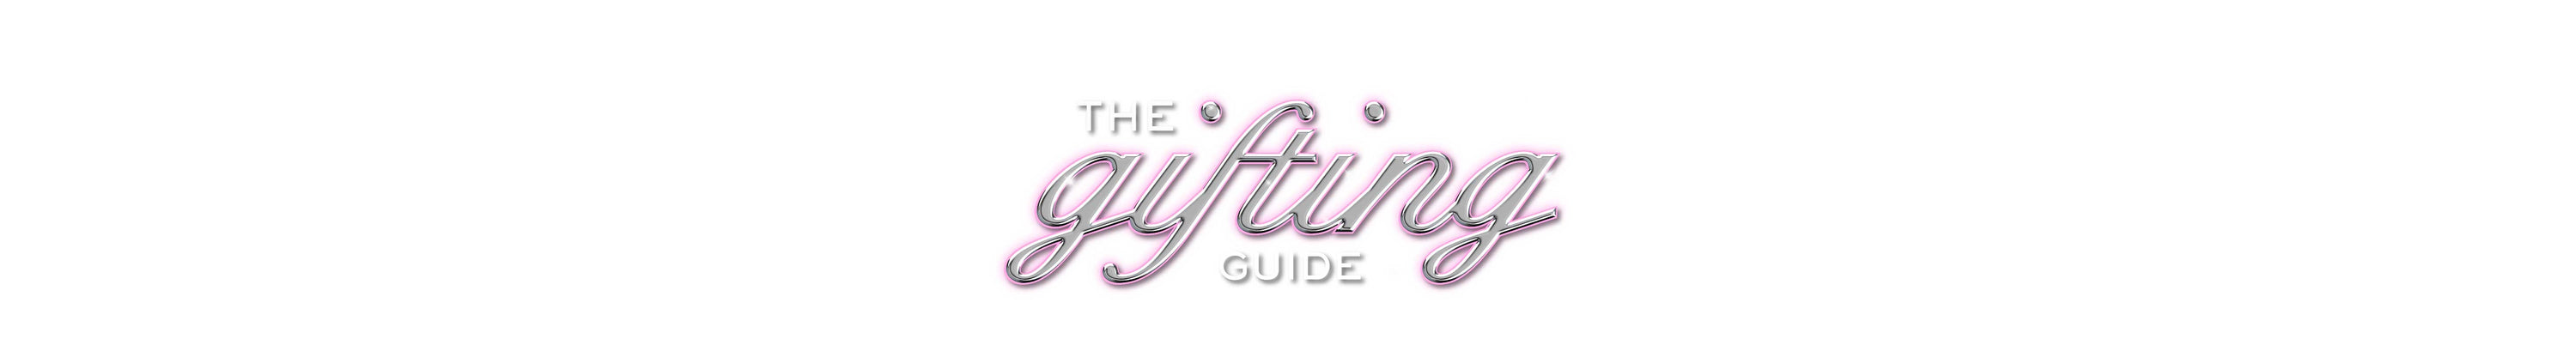 The Gifting Guide